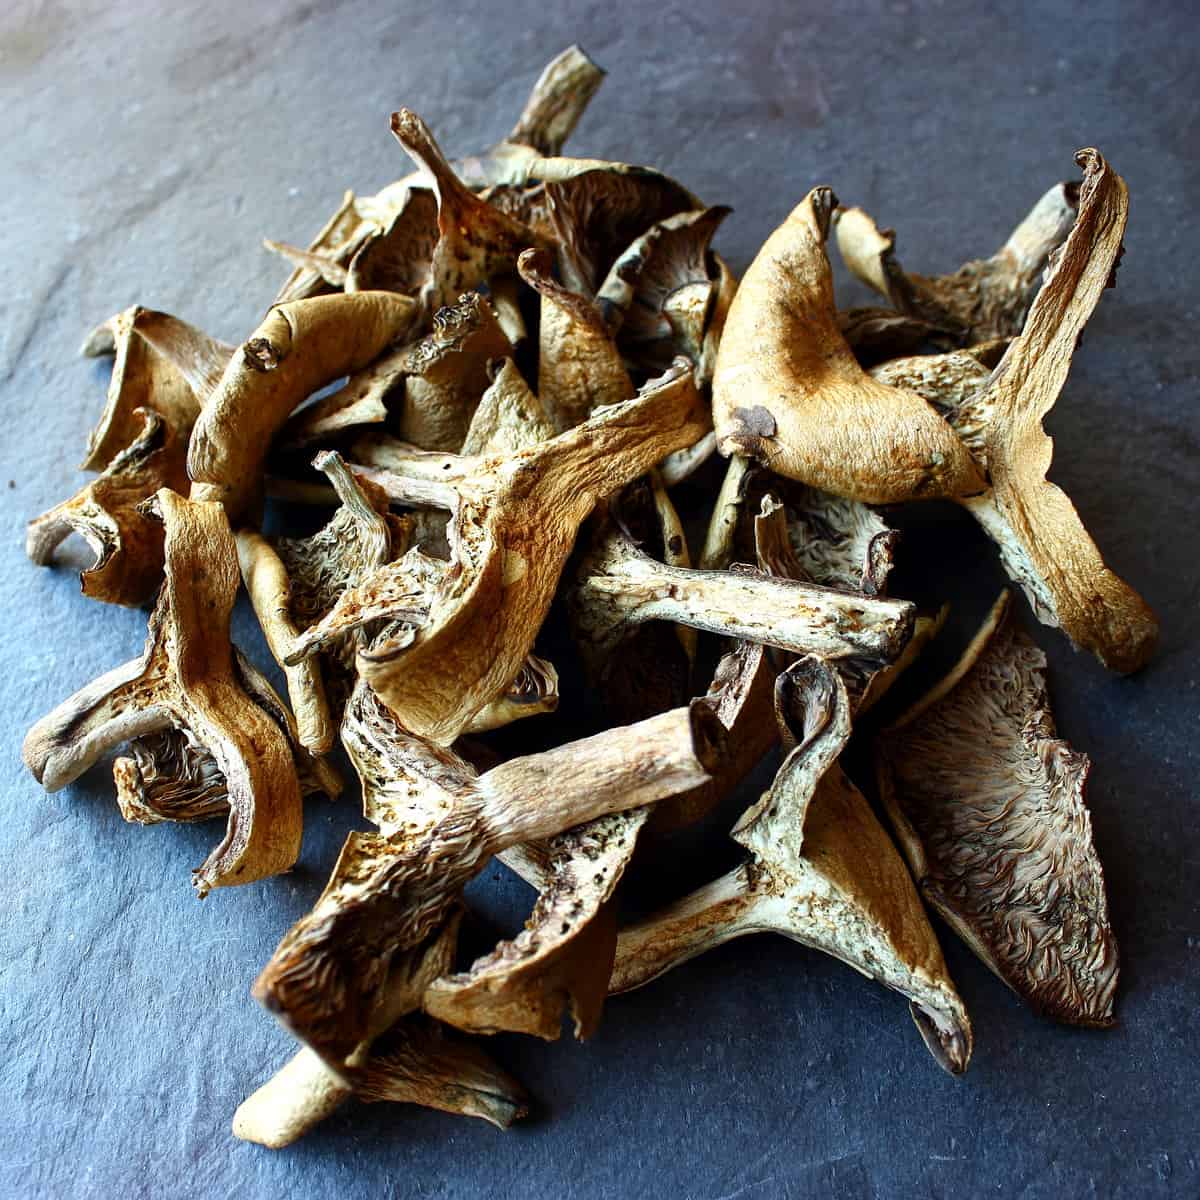 dried lactarius for powder and broth (1)